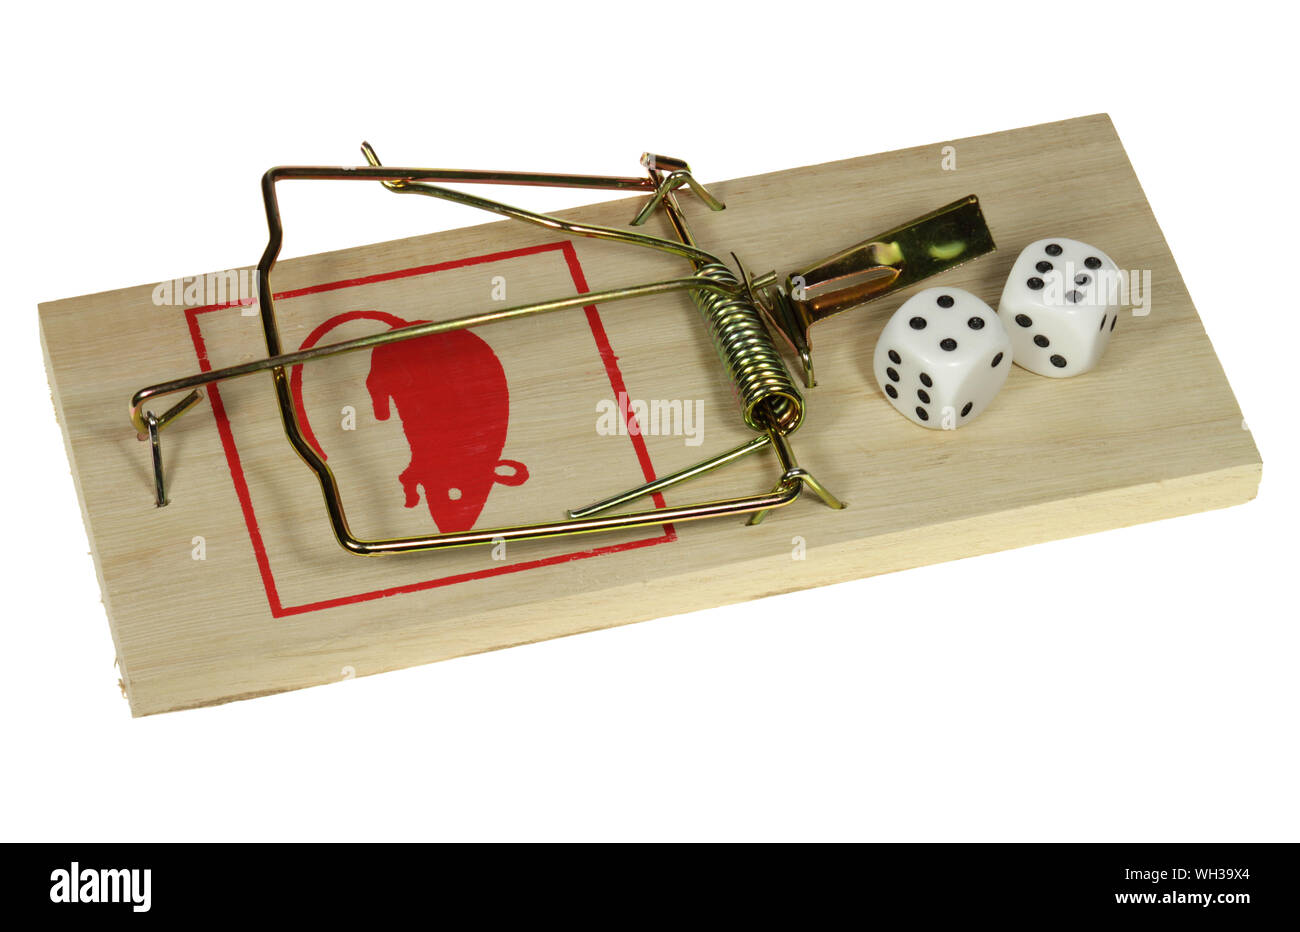 High Angle View Of Dice On Mousetrap Over White Background Stock Photo